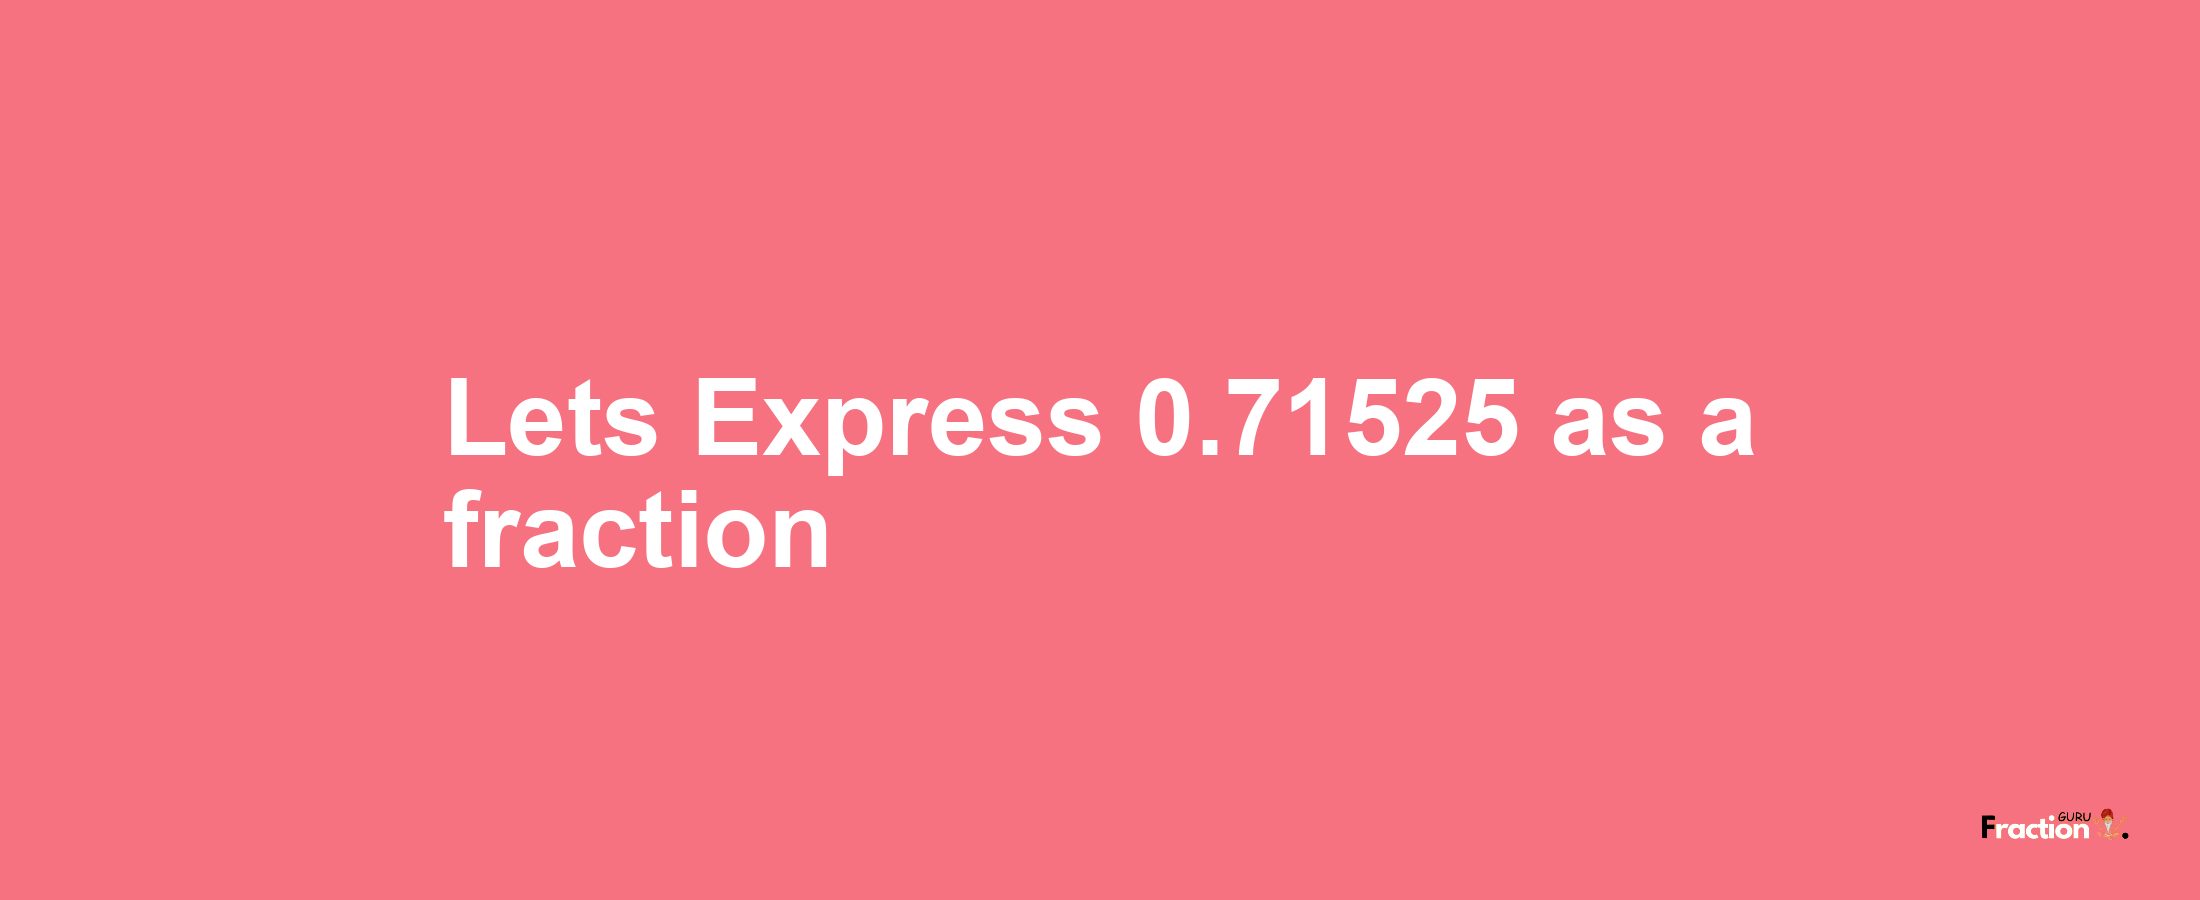 Lets Express 0.71525 as afraction